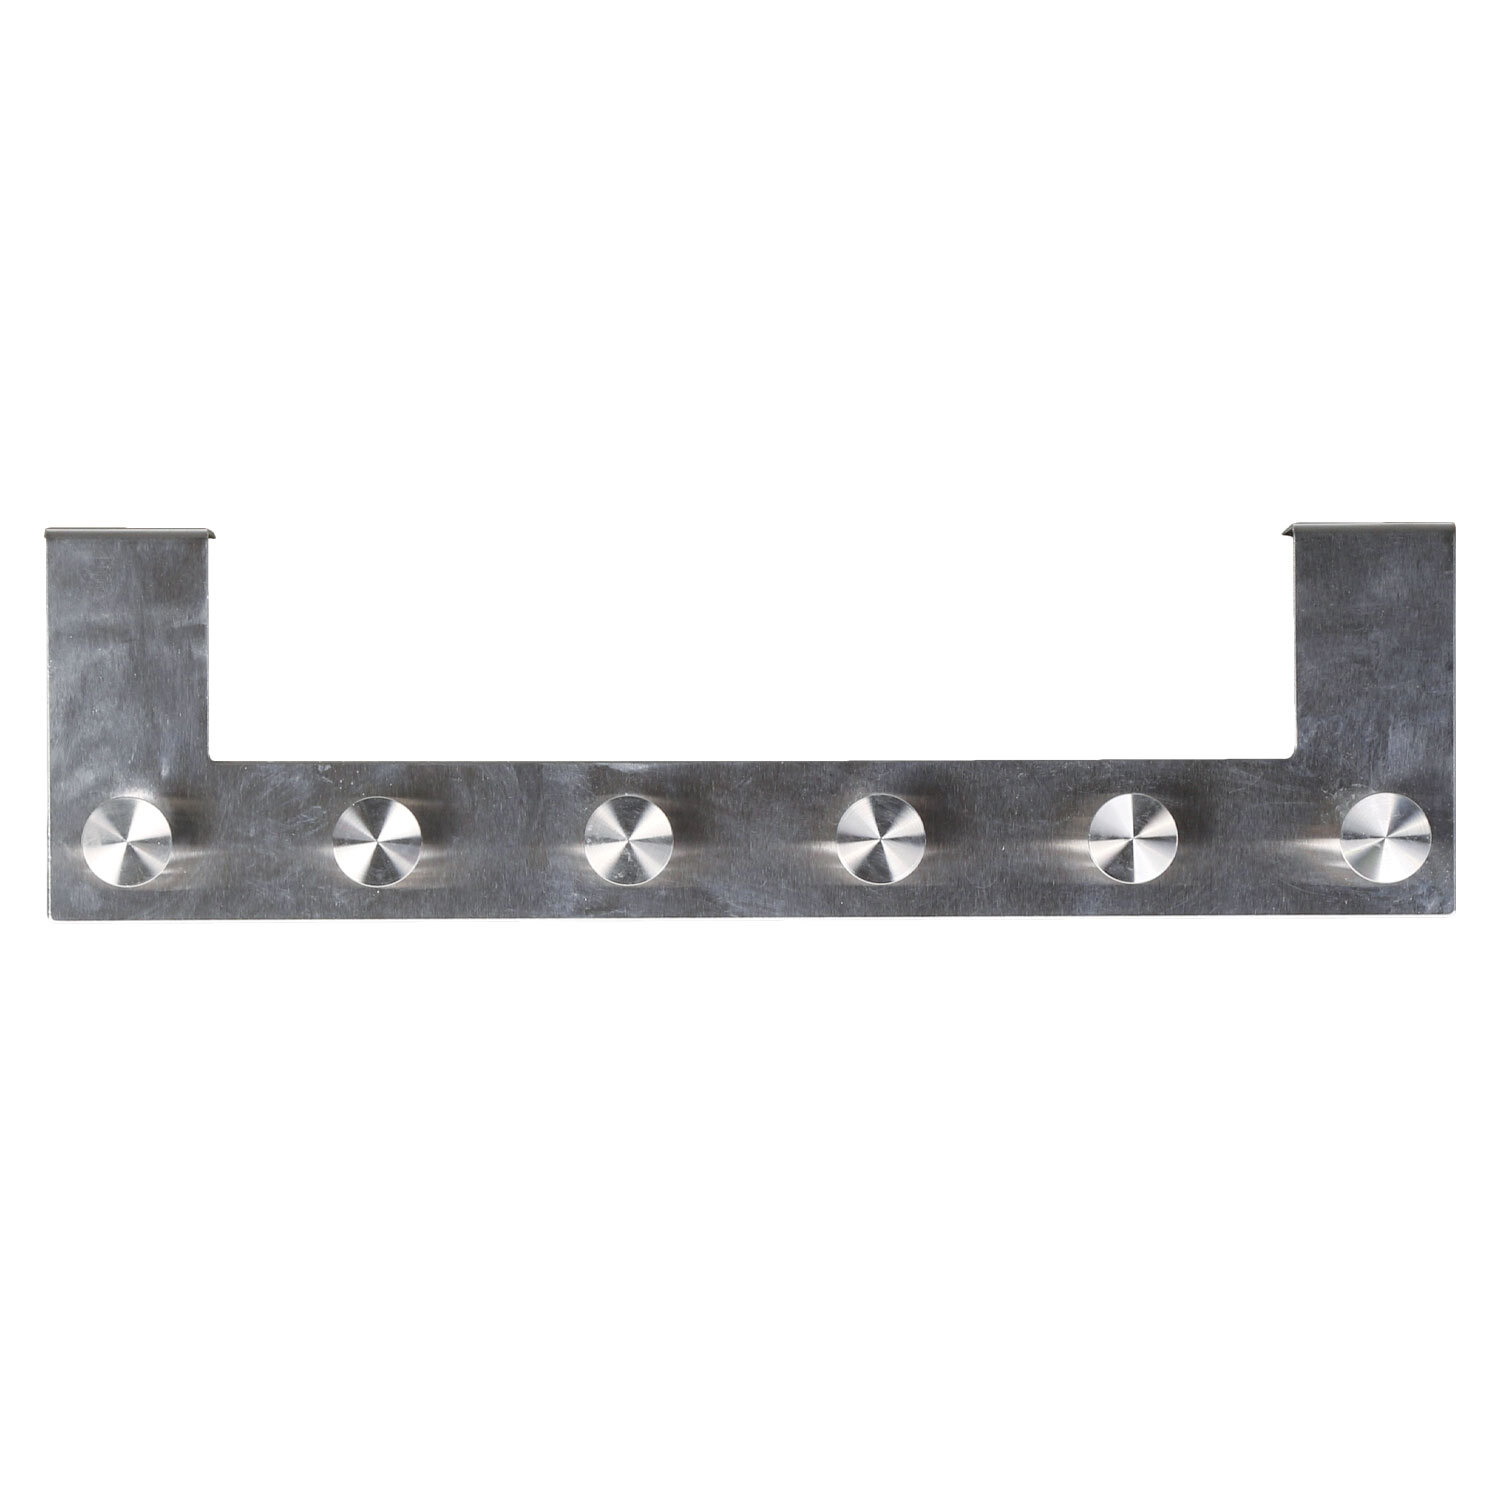 Decorails Brushed Stainless Steel 6 Hook Coat Rail Image